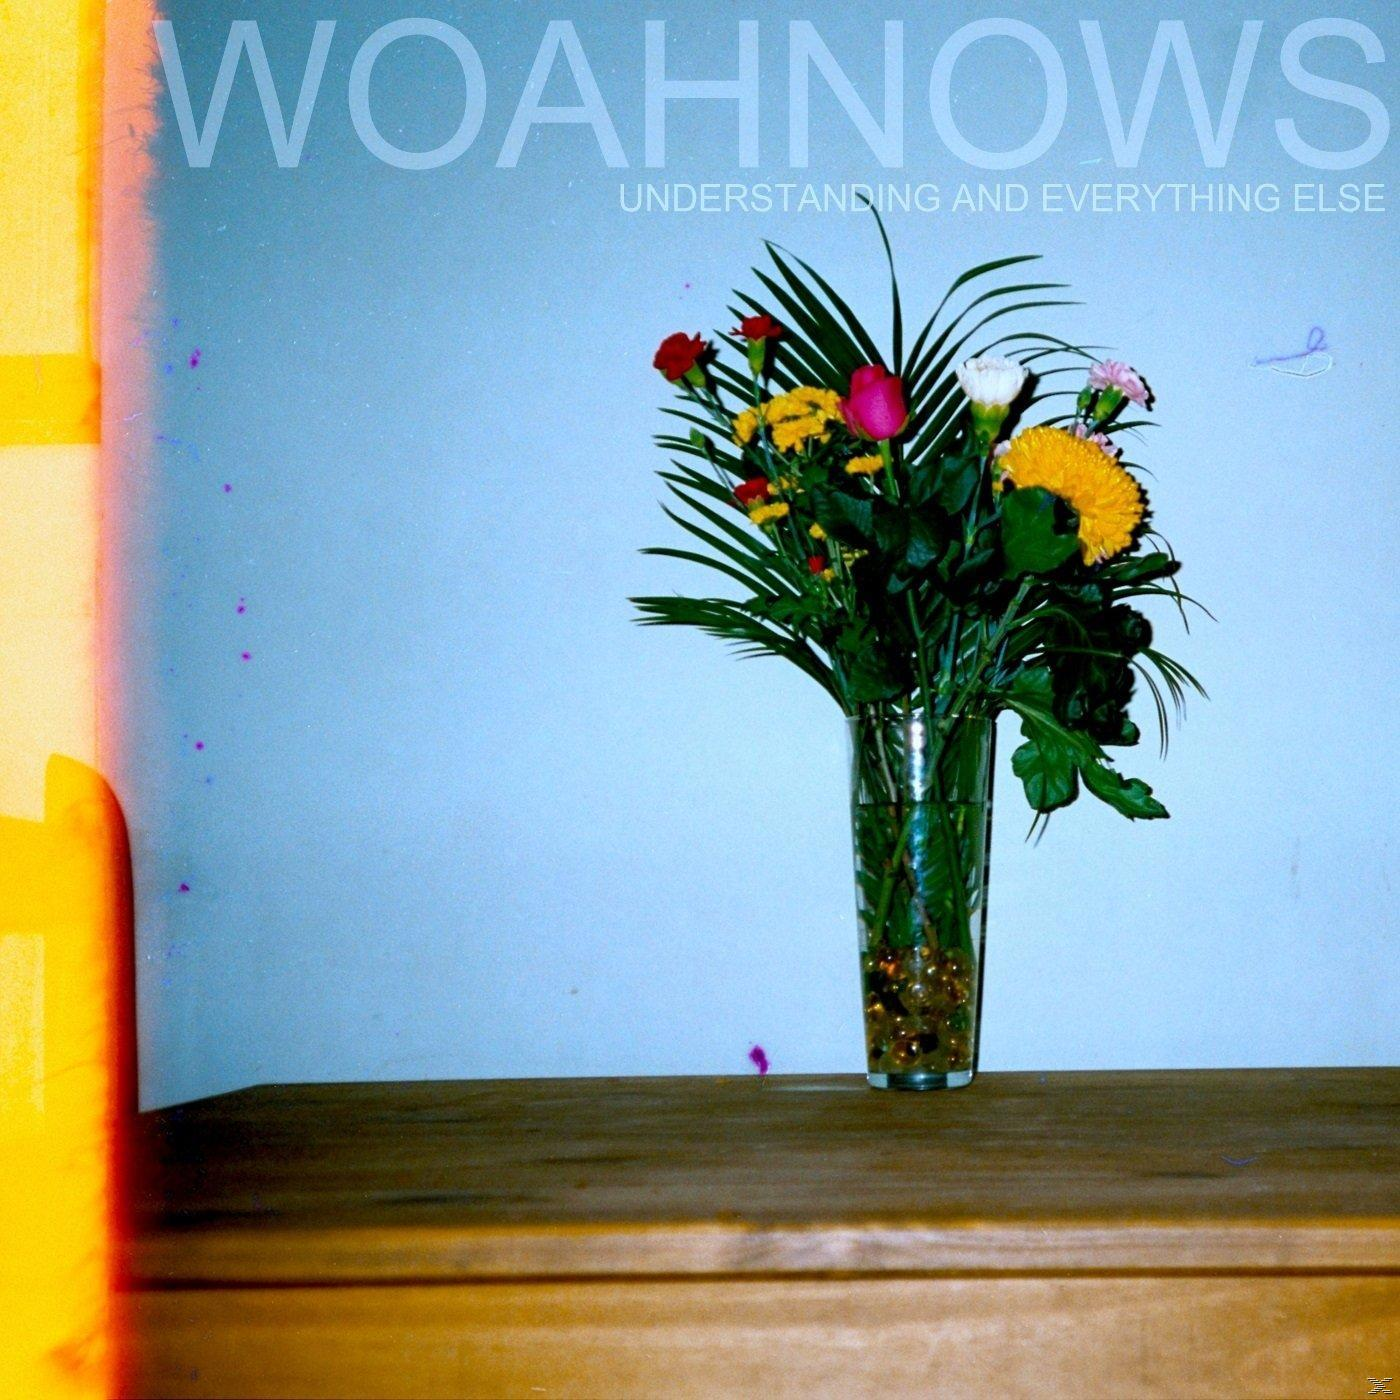 Everything Woahnows (CD) And Understanding E - -